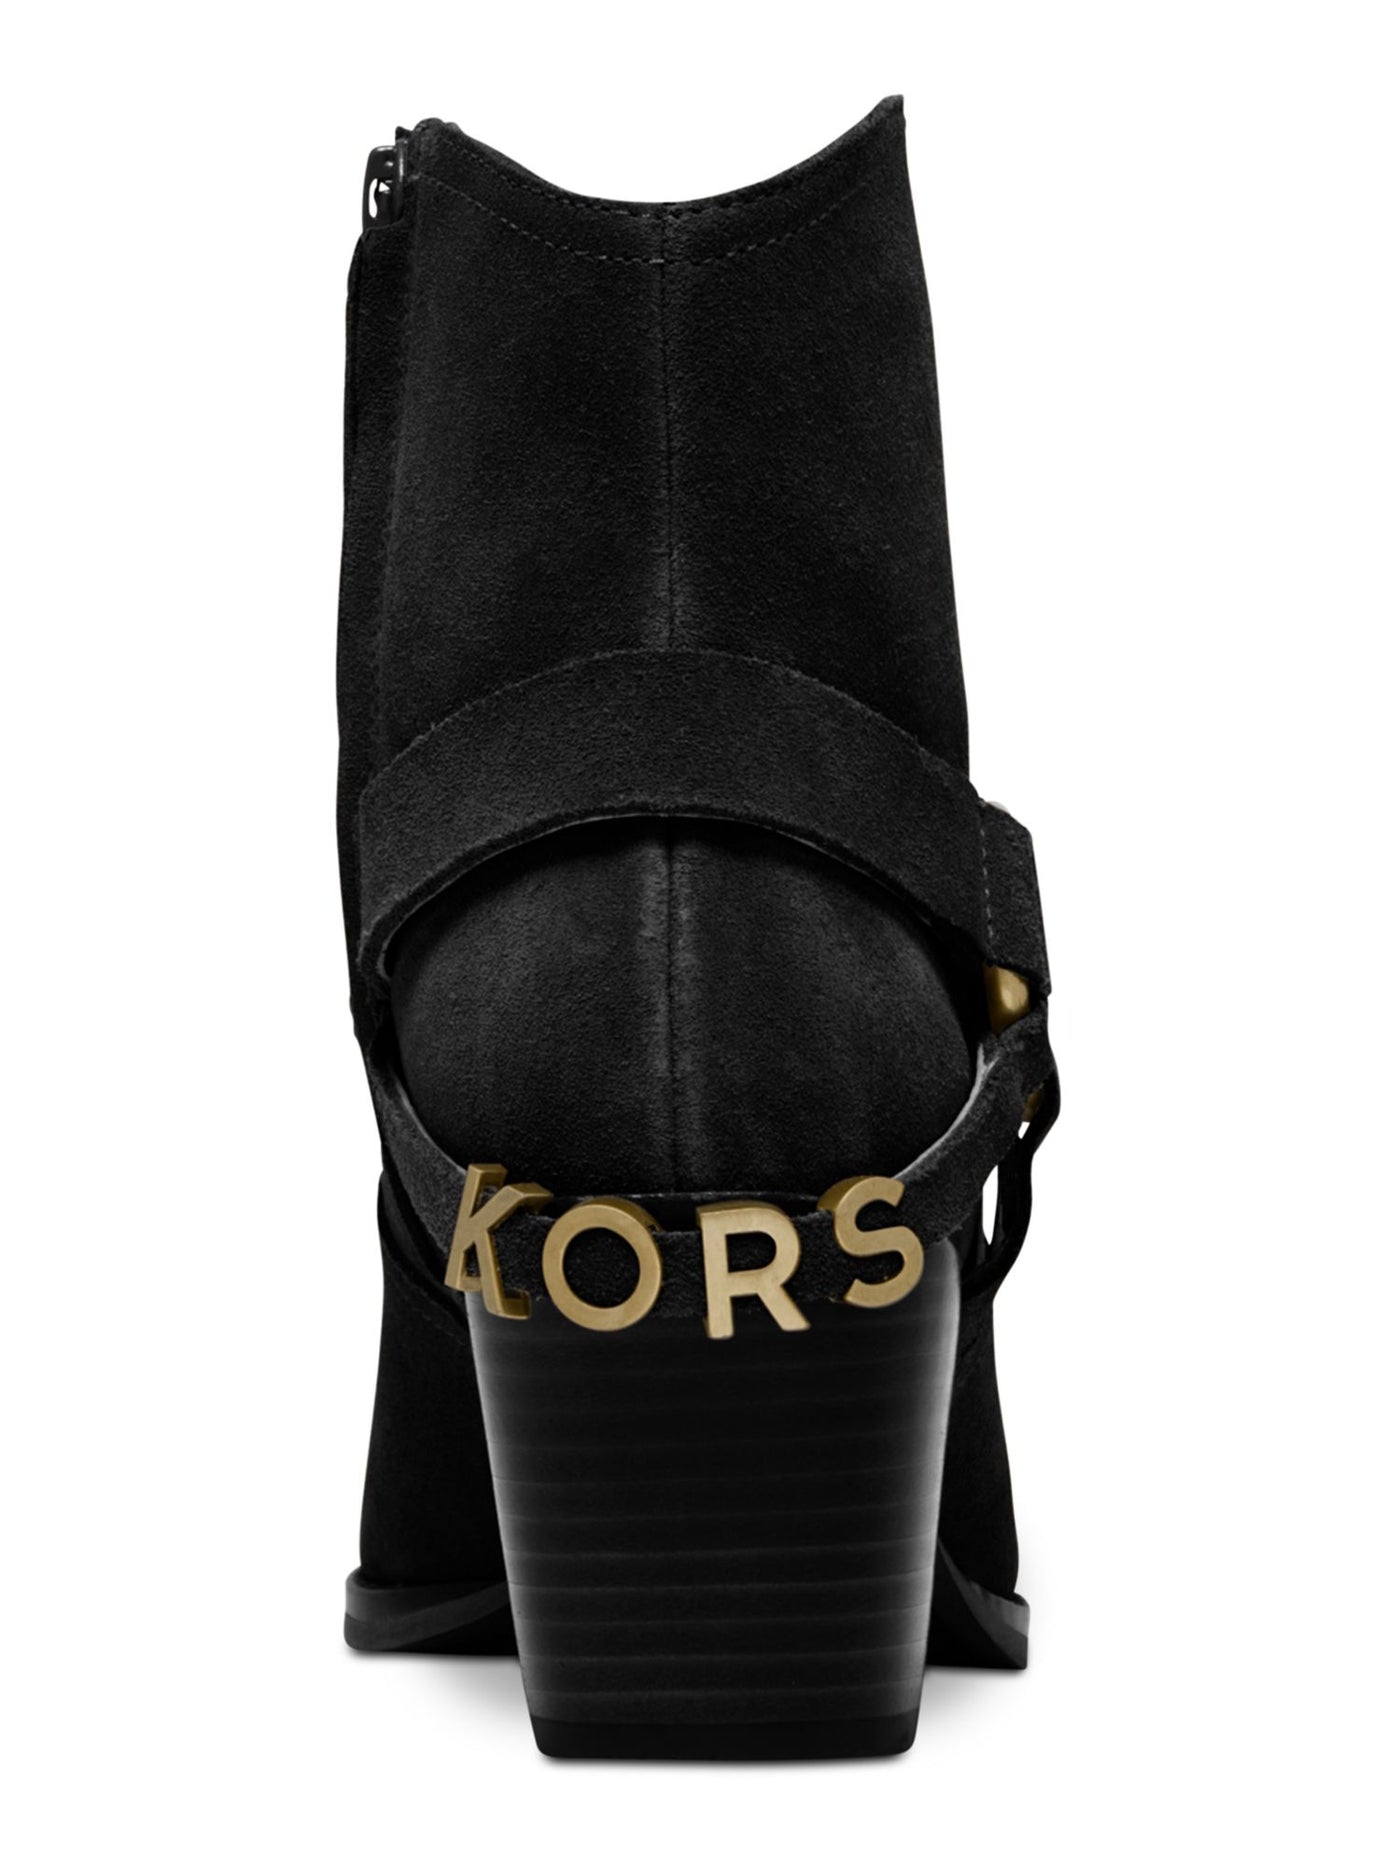 MICHAEL KORS Womens Black Metallic Ring Accent Padded Logo Strappy Goldie Almond Toe Block Heel Zip-Up Leather Booties 6 M